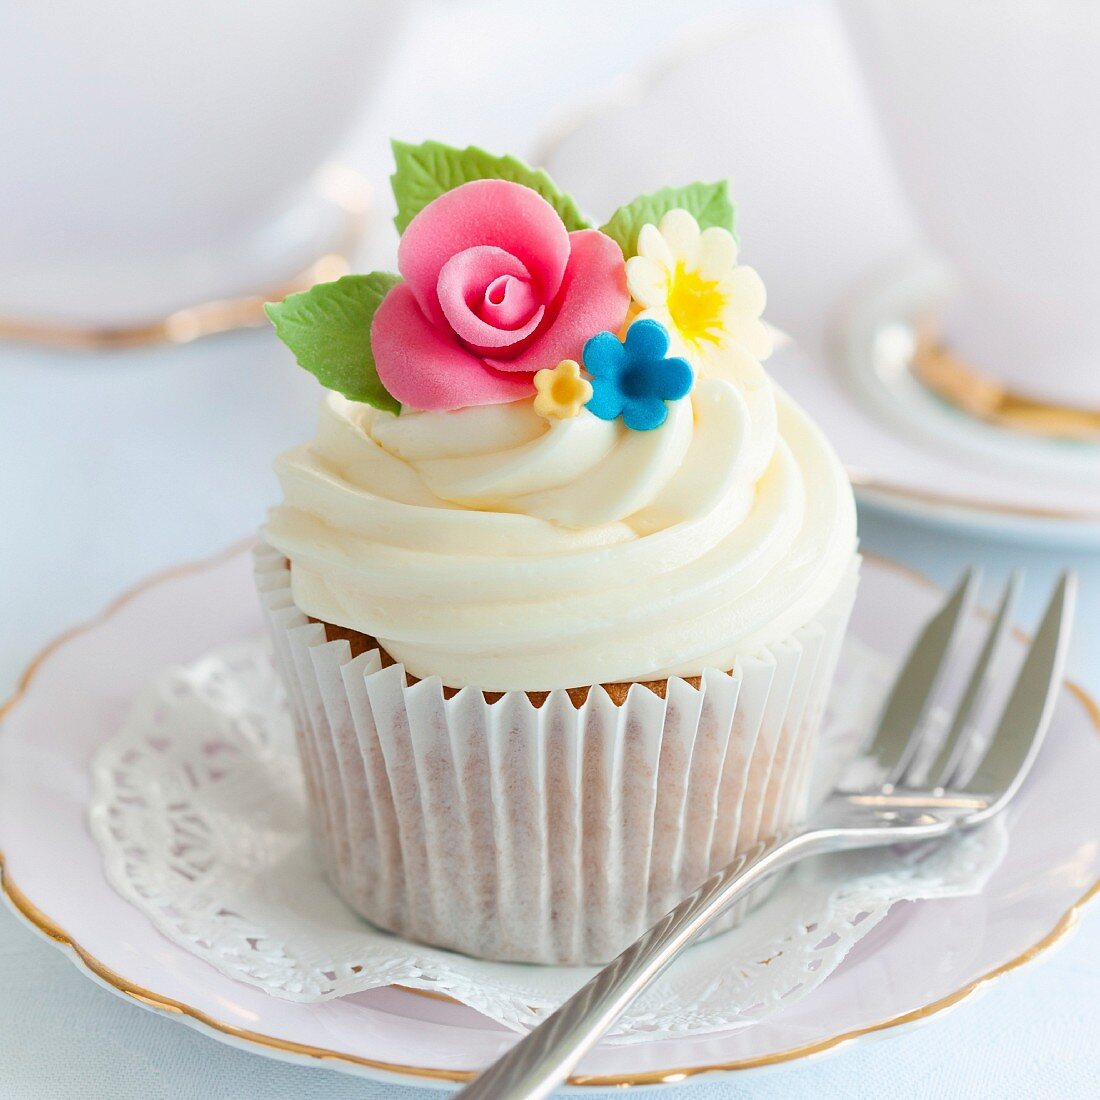 Cupcake decorated with sugar flowers